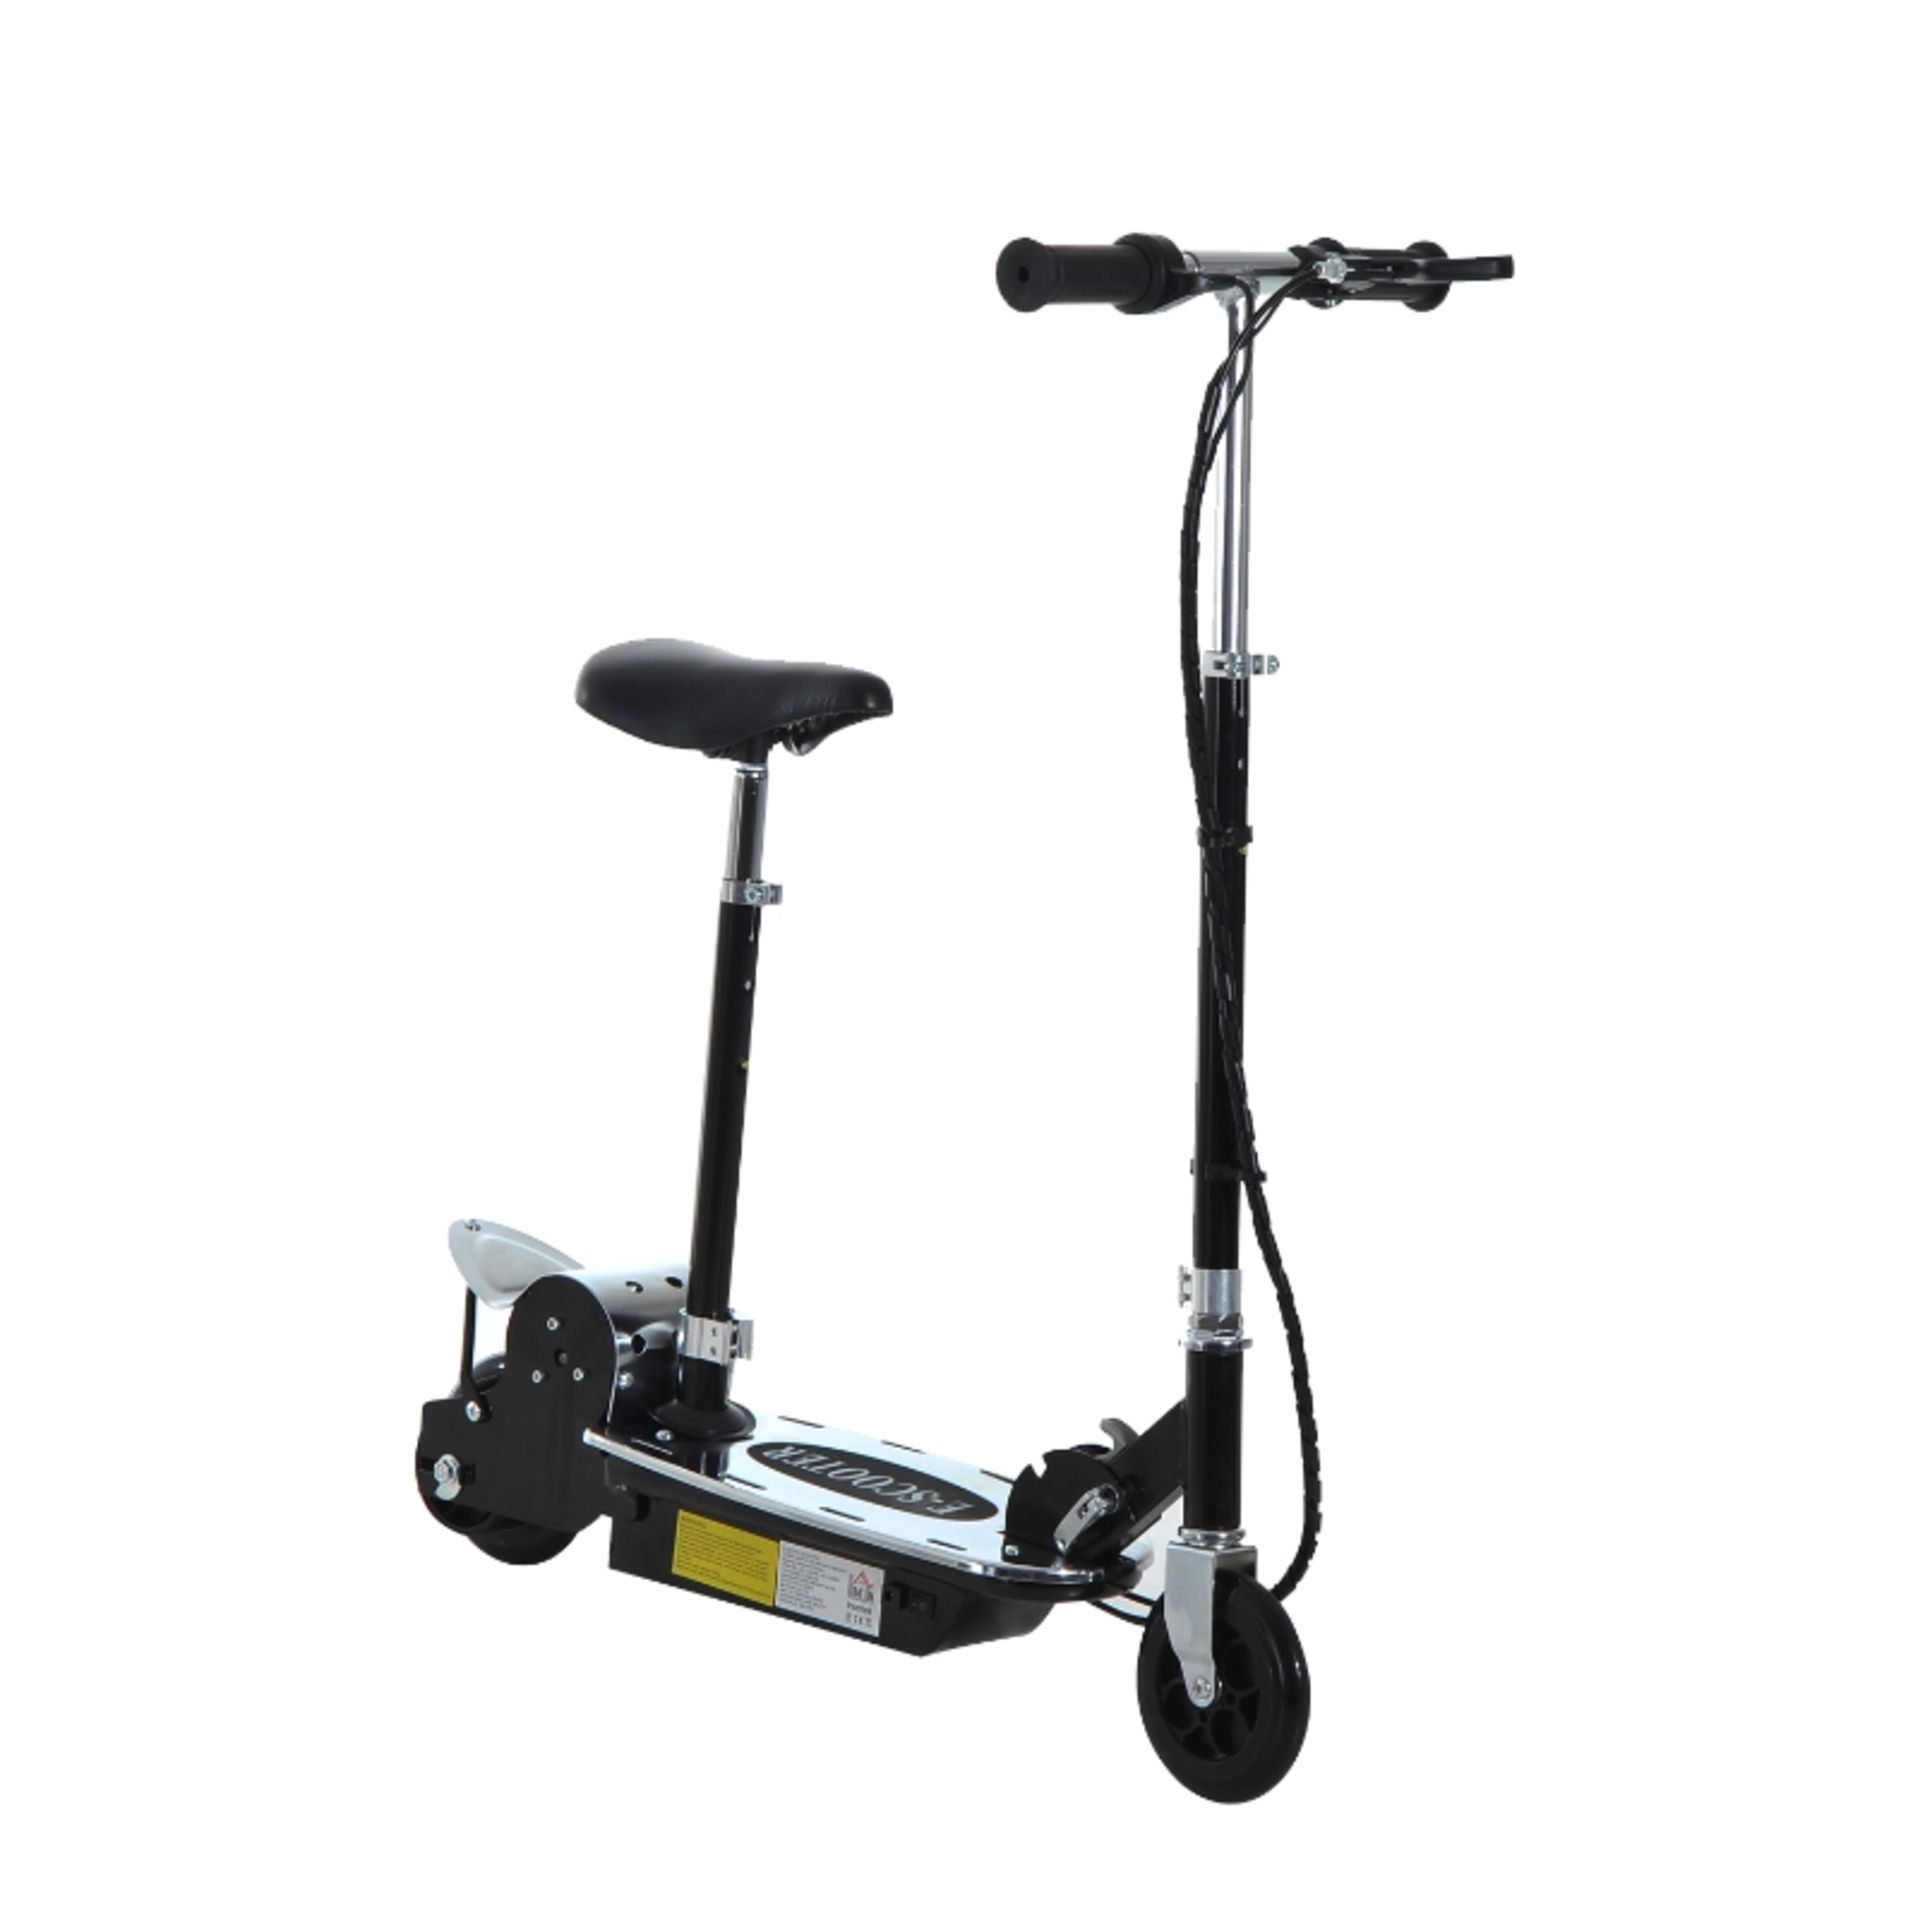 RPP £107.99 -HOMCOM 120W Foldable Kids Powered Scooters with 24V Rechargeable Battery, Adjustable - Image 2 of 4